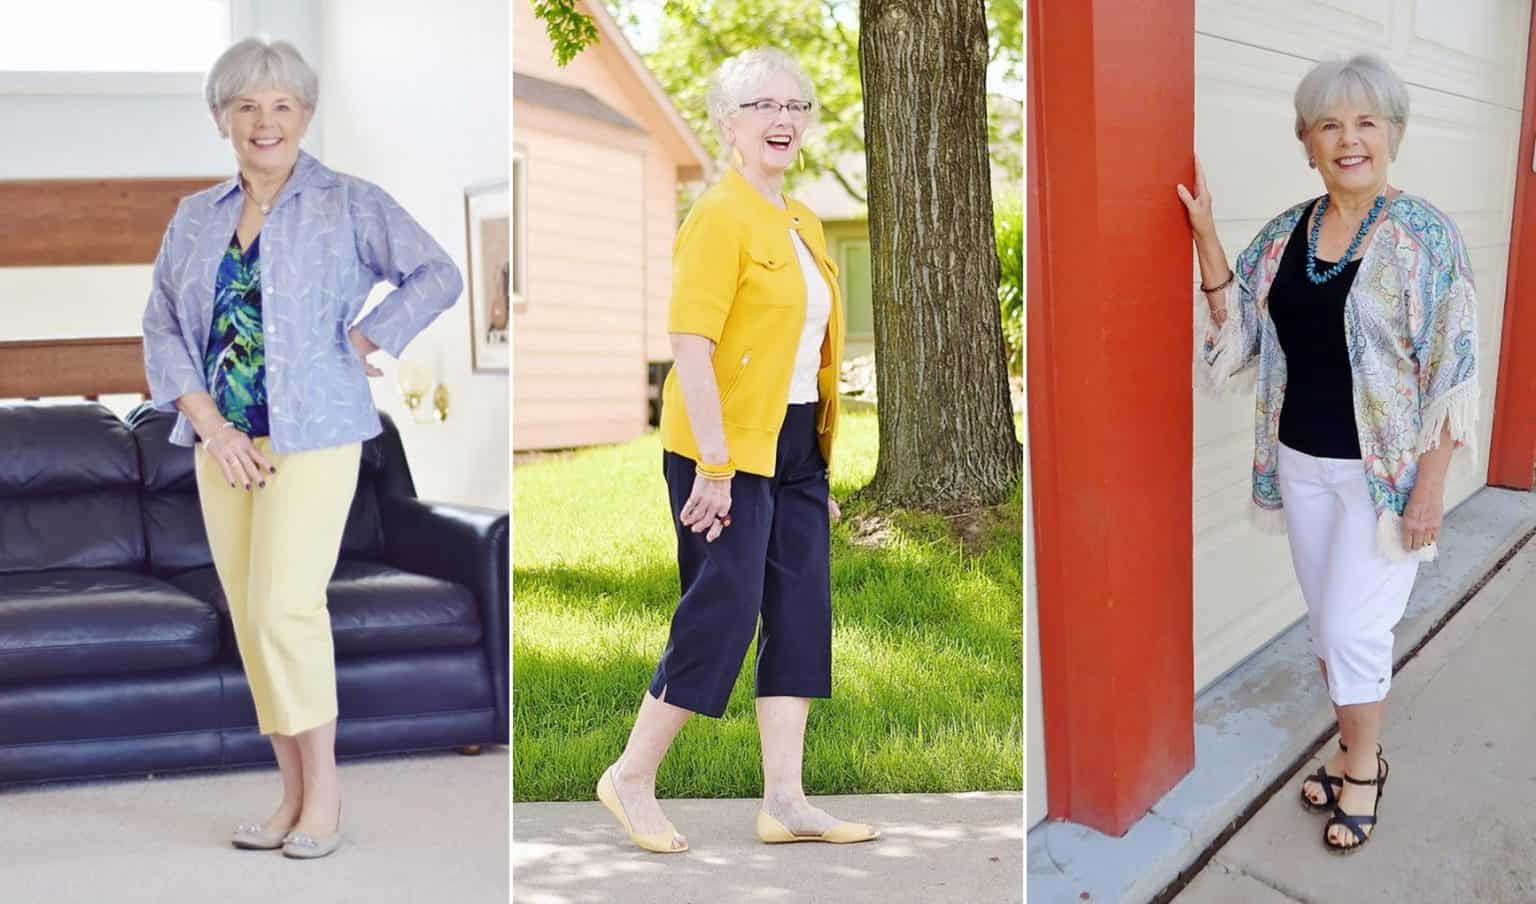 Fashion for Older Women: Capri Pants for the Summer Months | Sixty and Me